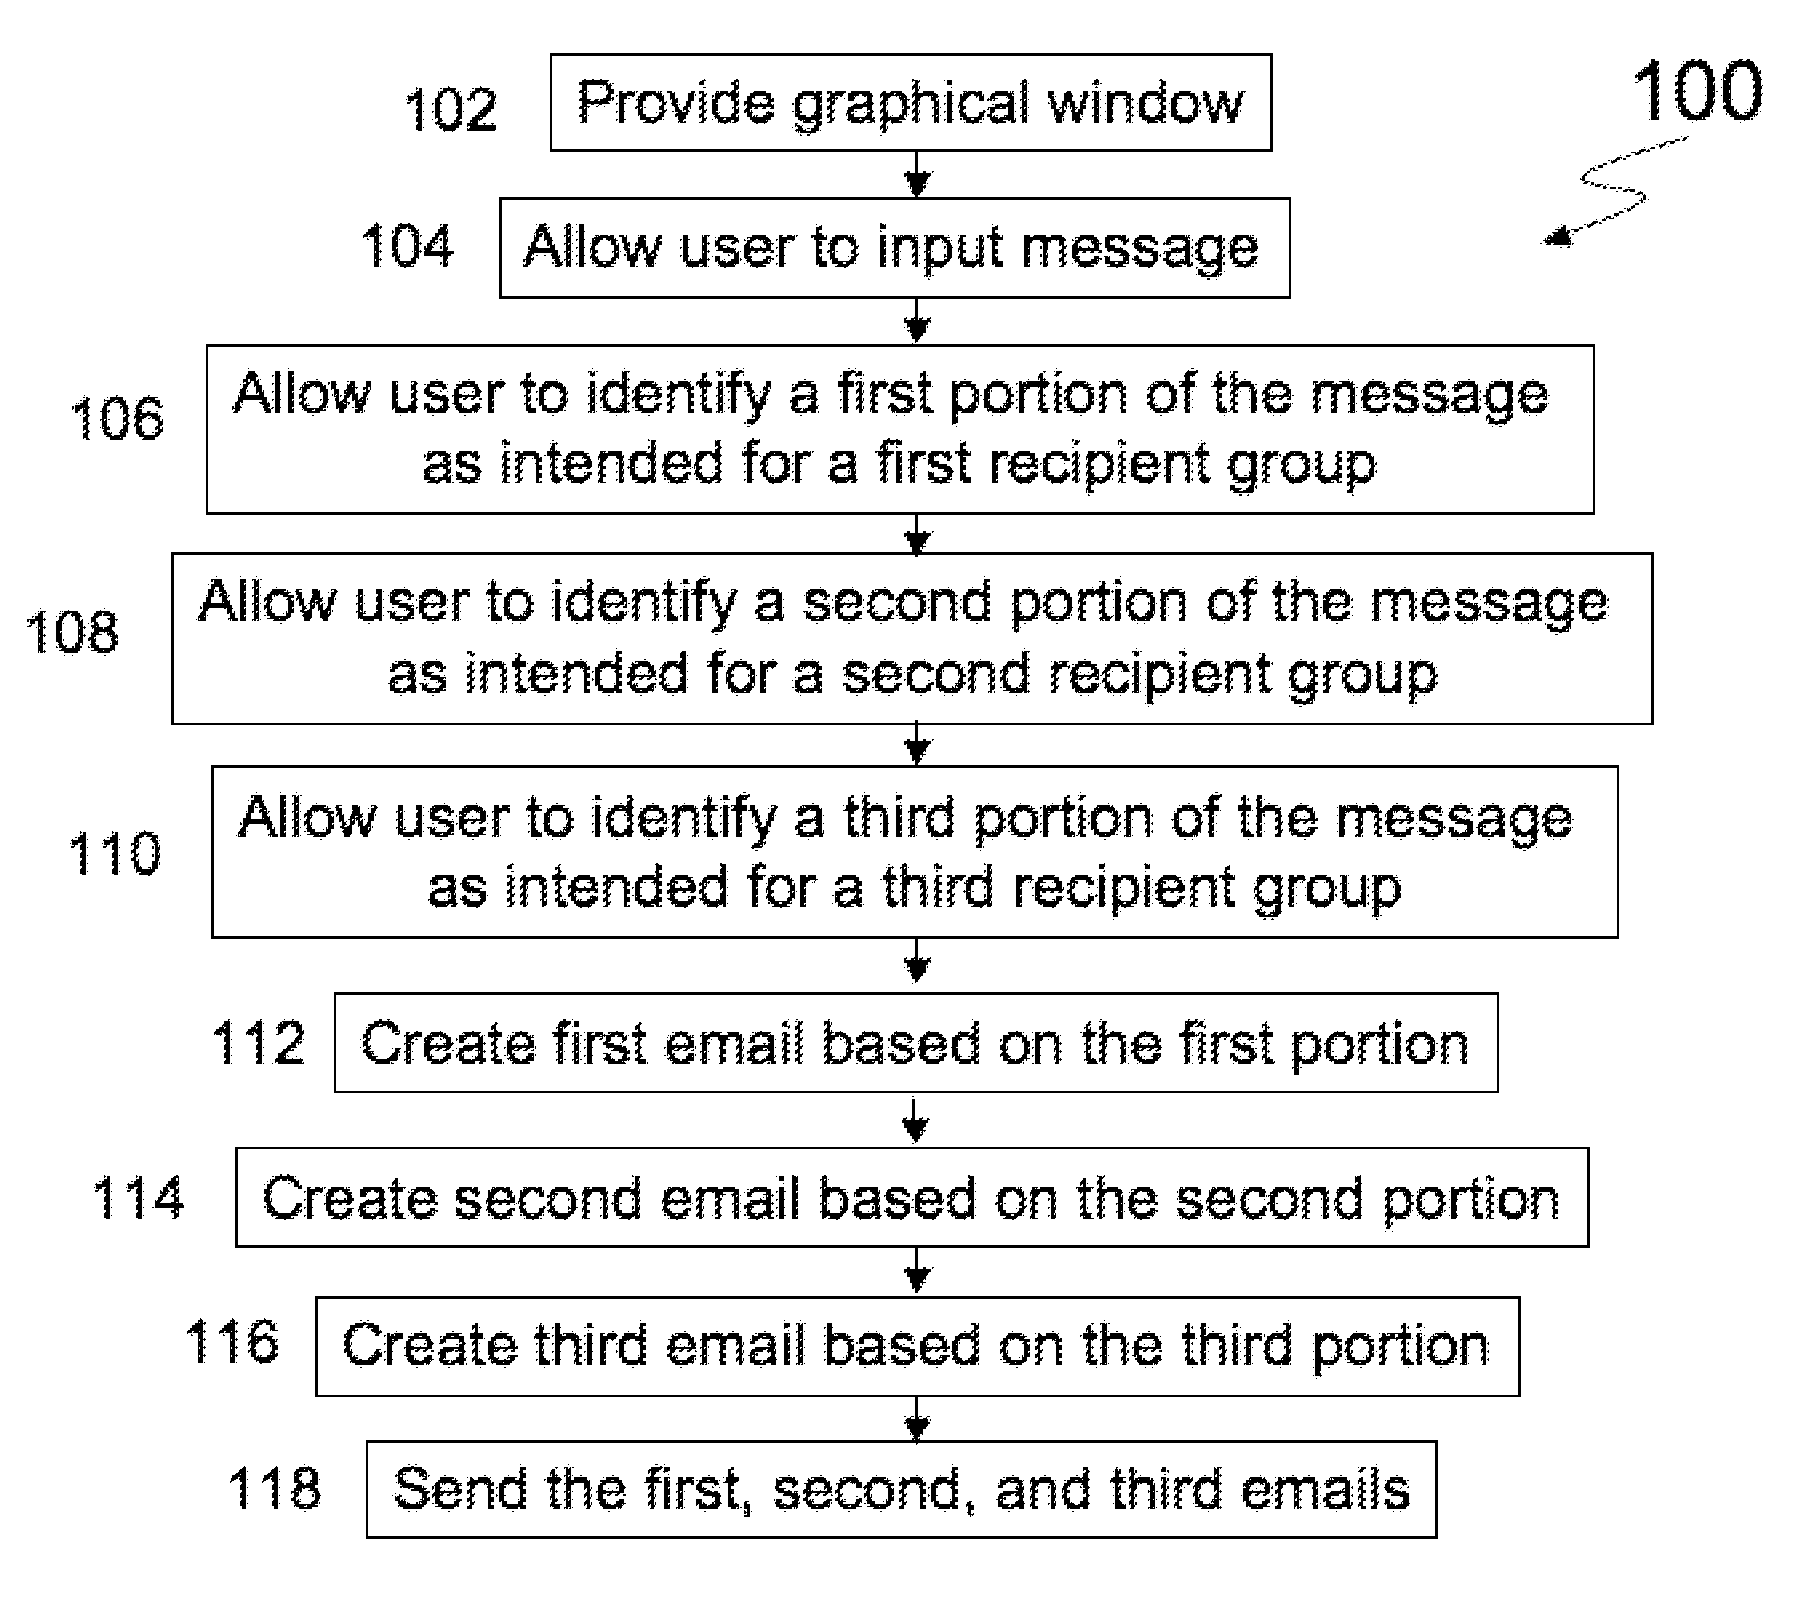 Systems and methods for sending customized emails to recipient groups